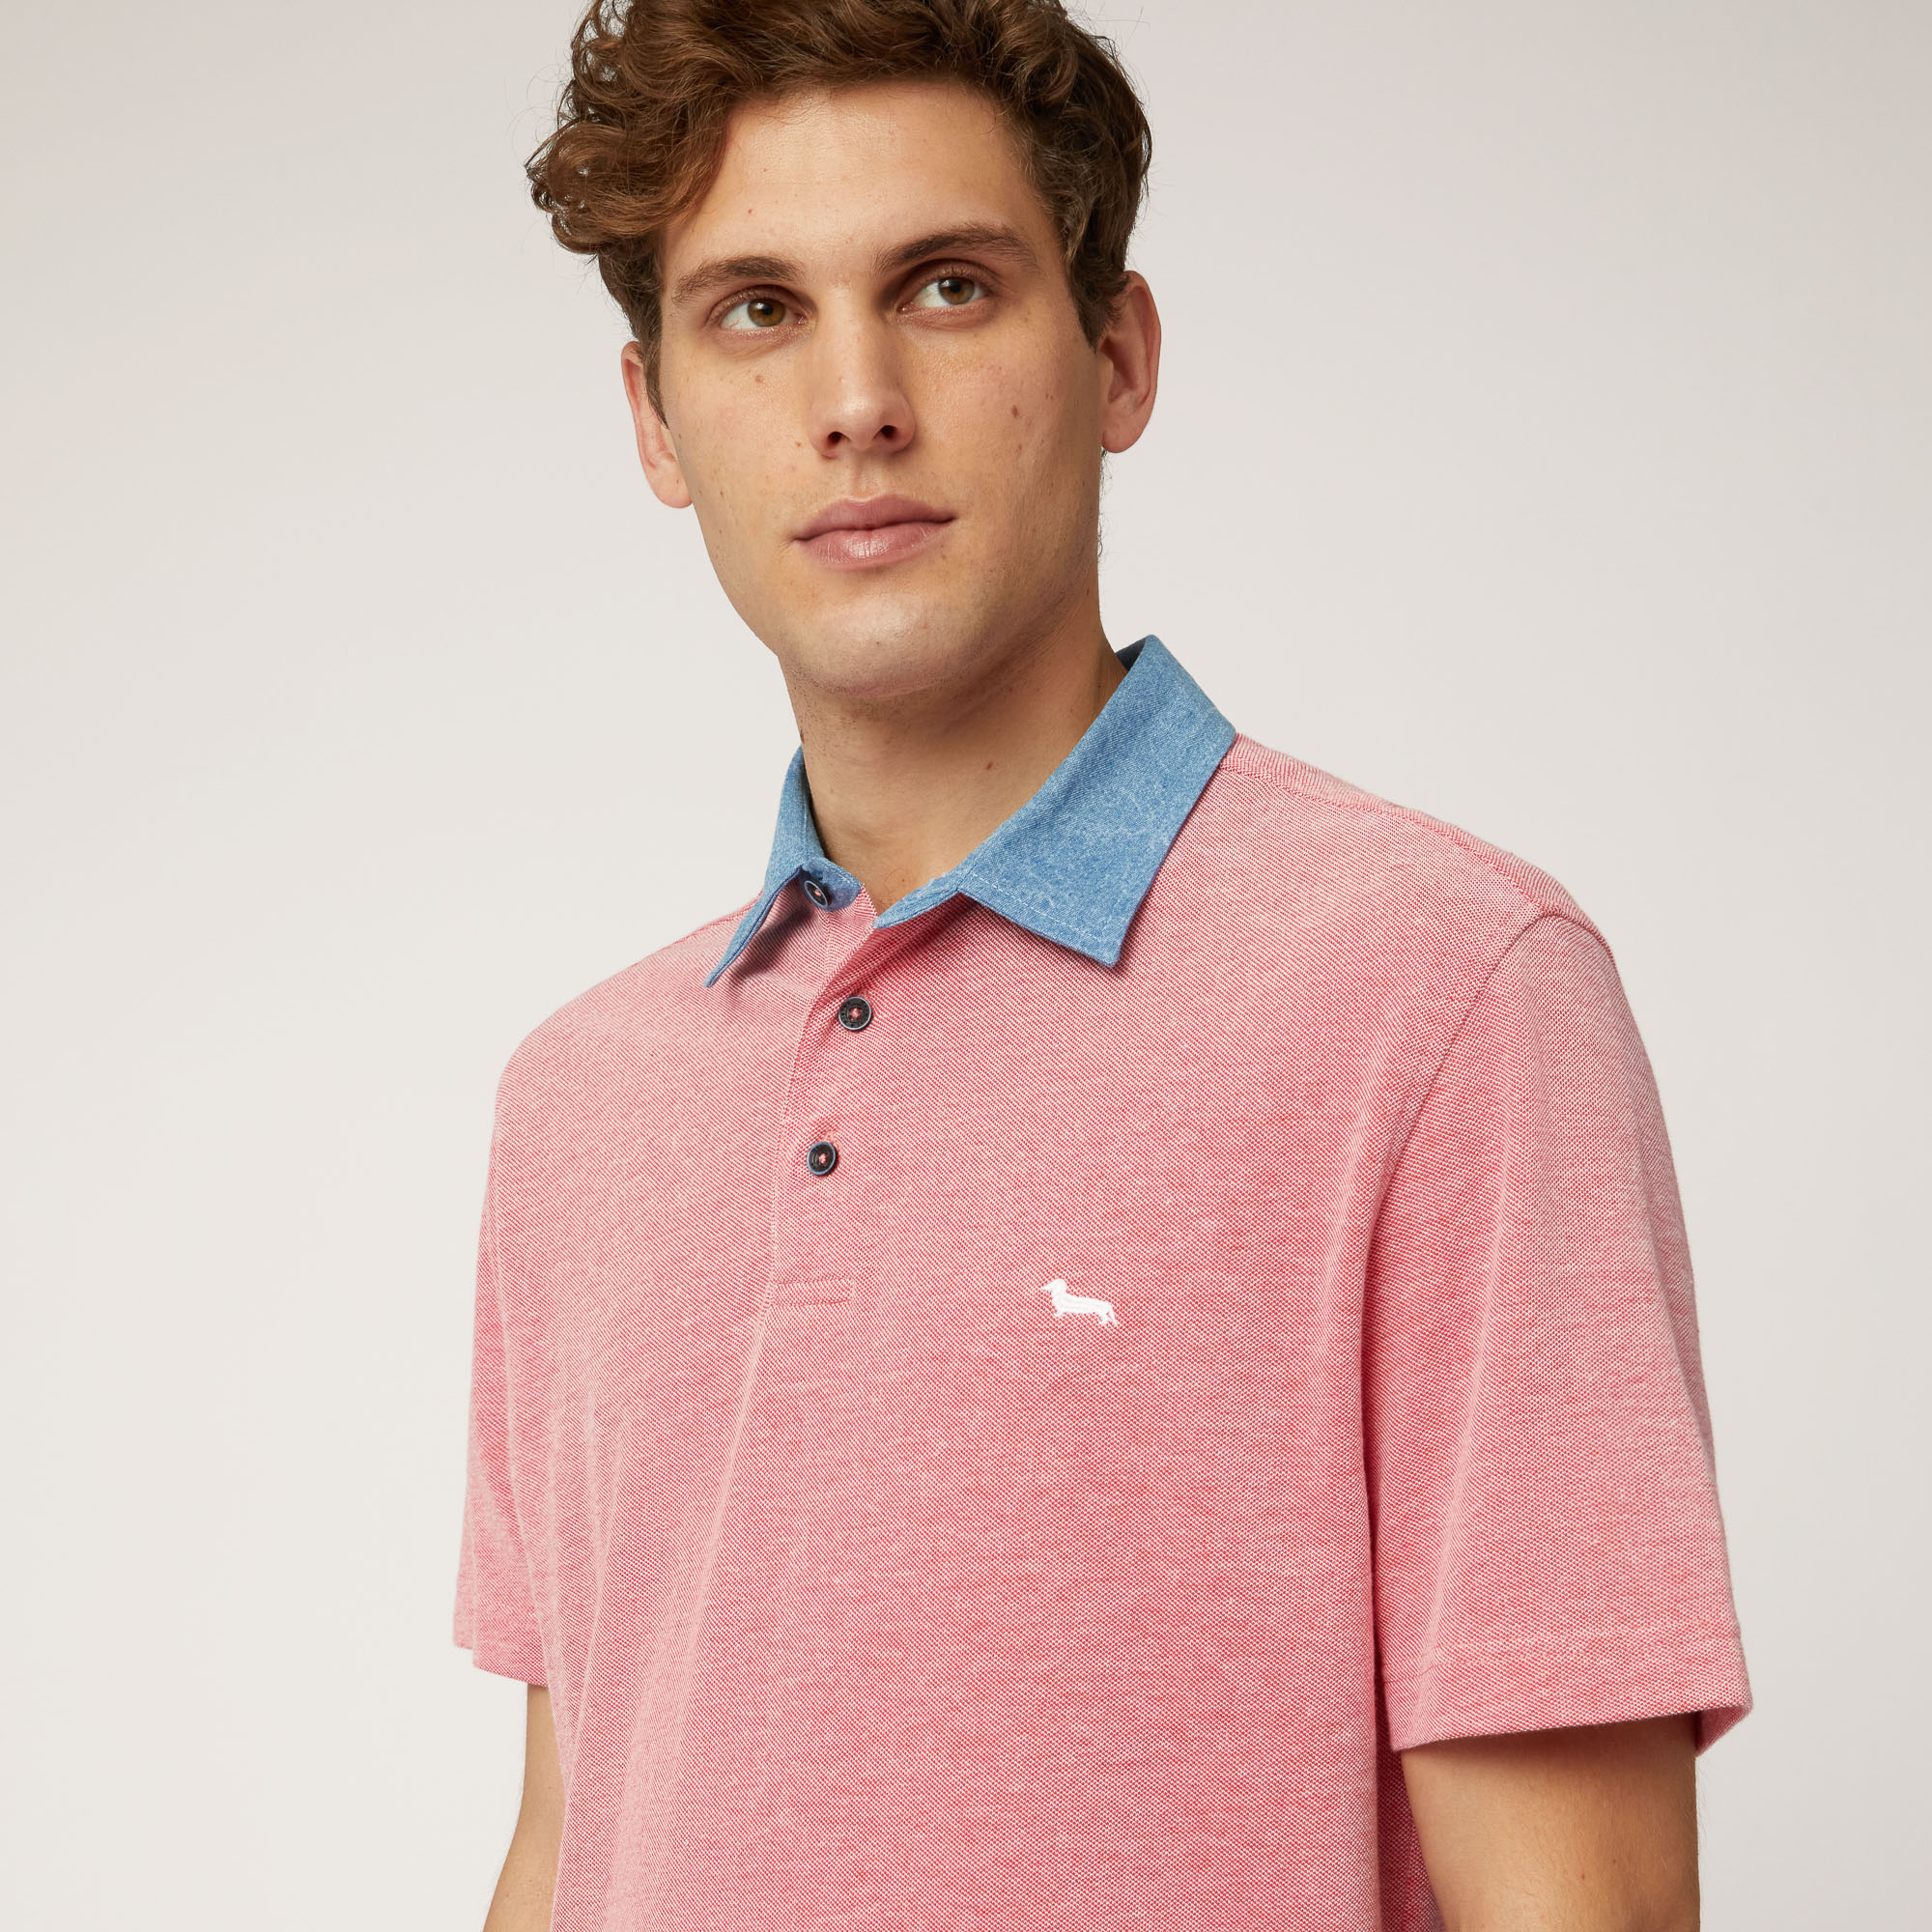 Oxford Cotton Vietri Polo, Light Red, large image number 2